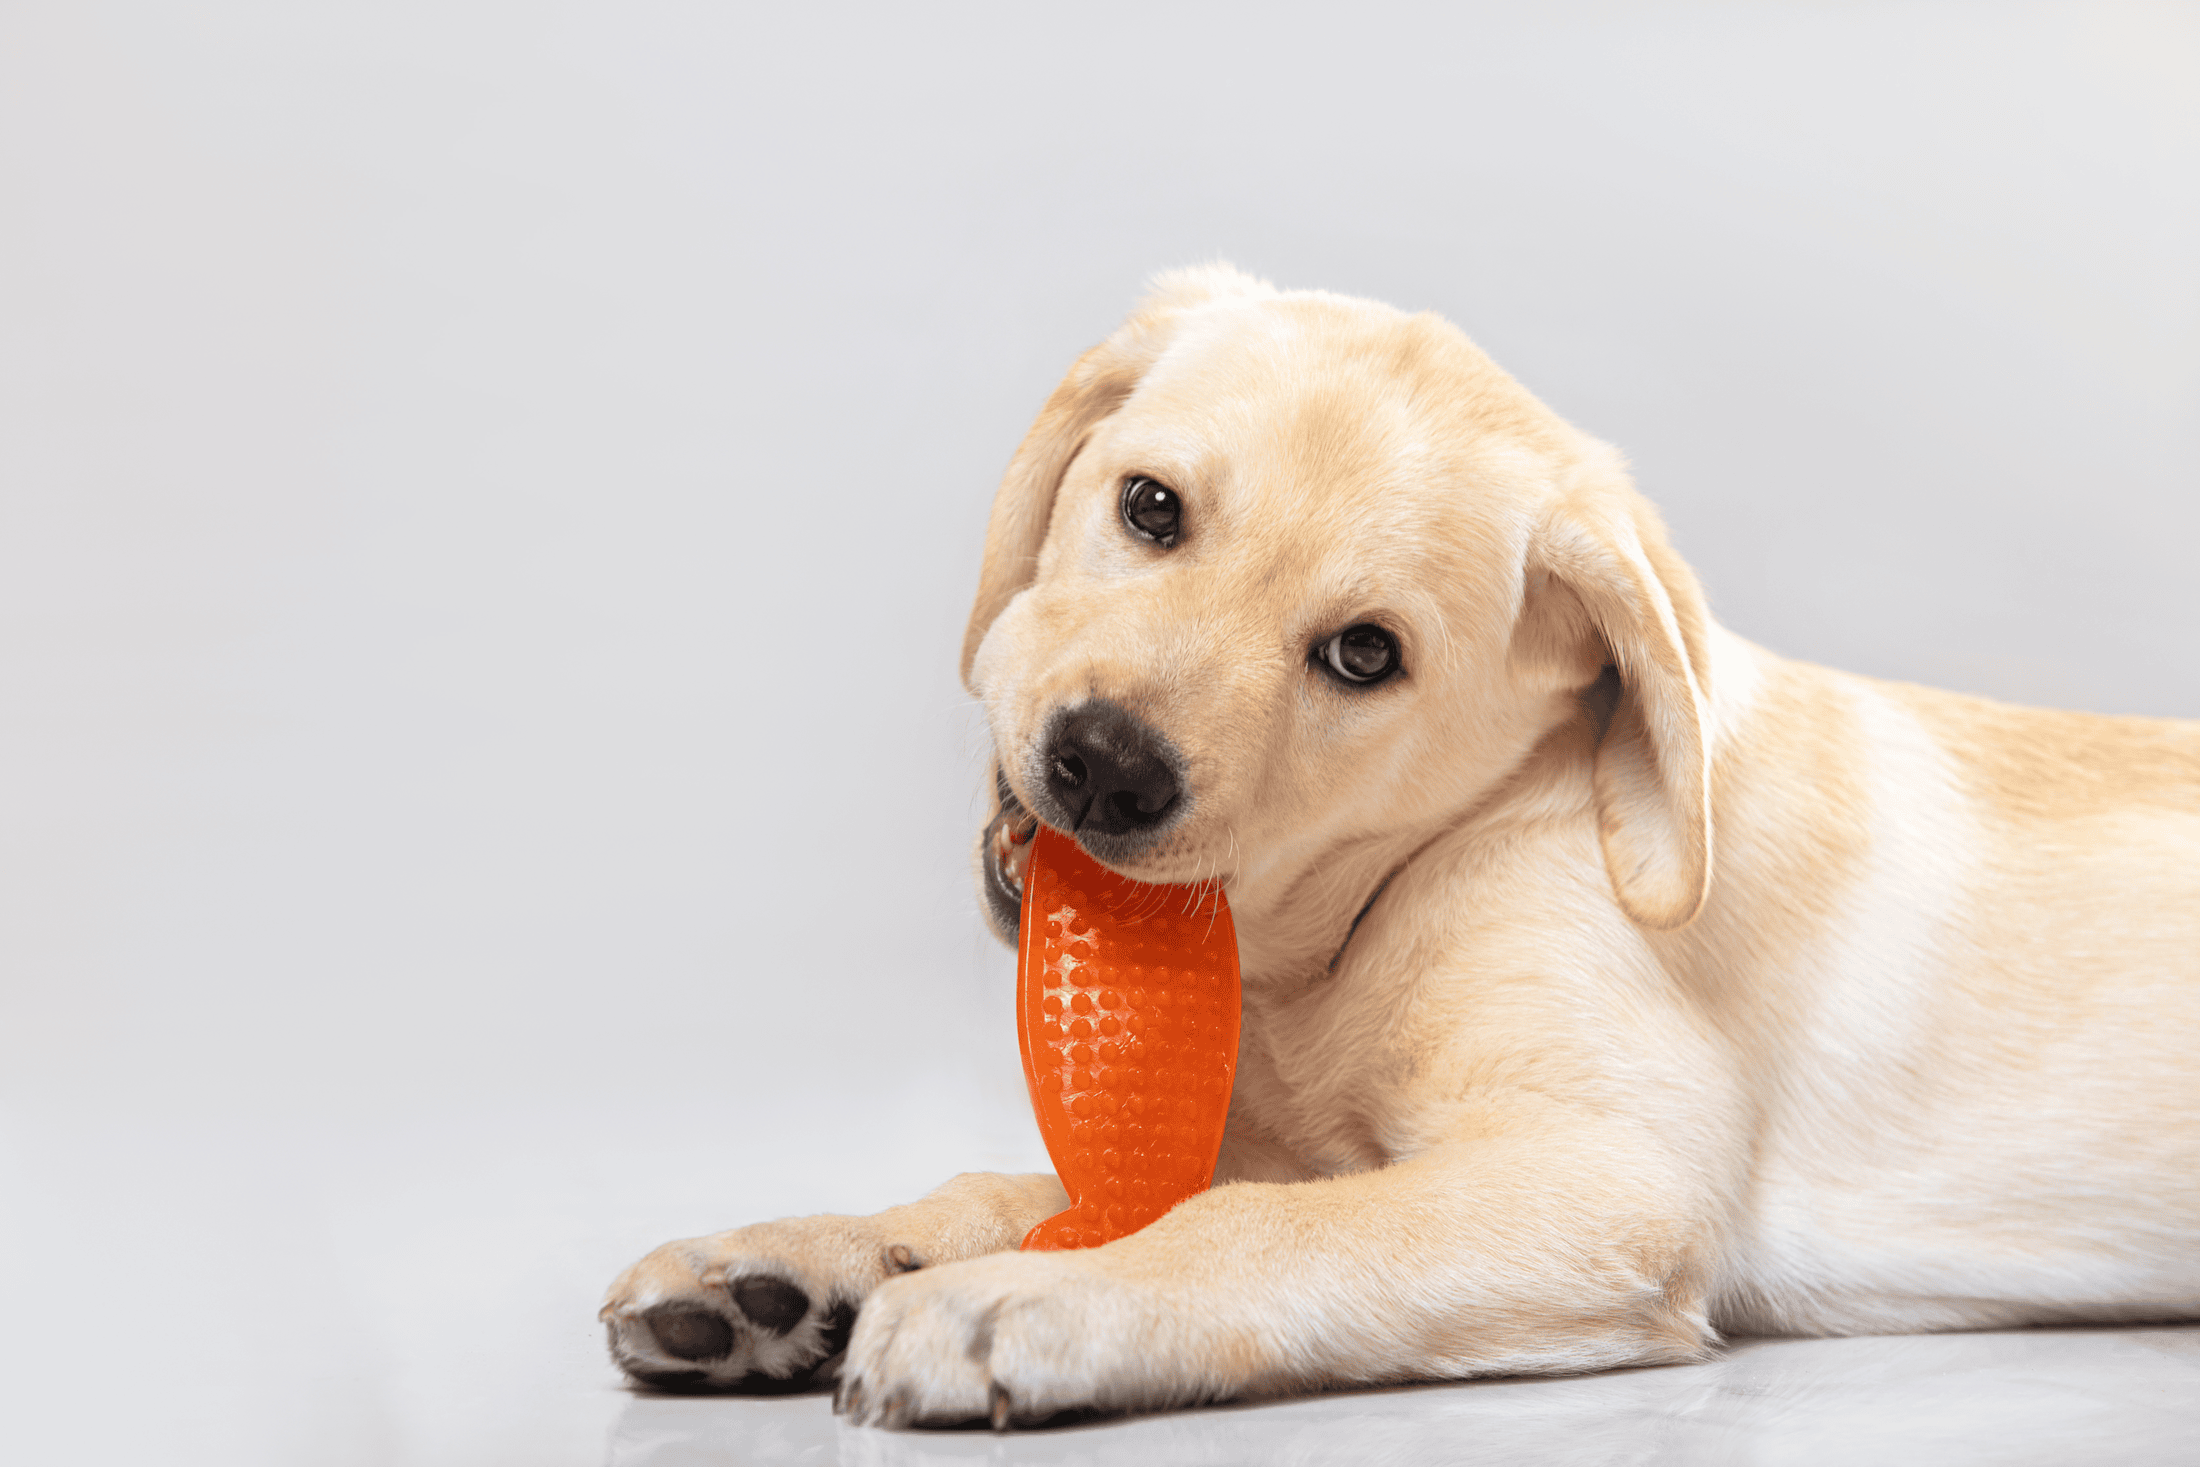 Give your puppy a chew toy to keep her mind busy. You can also hire a professional dog trainer if your dog whines excessively for attention.